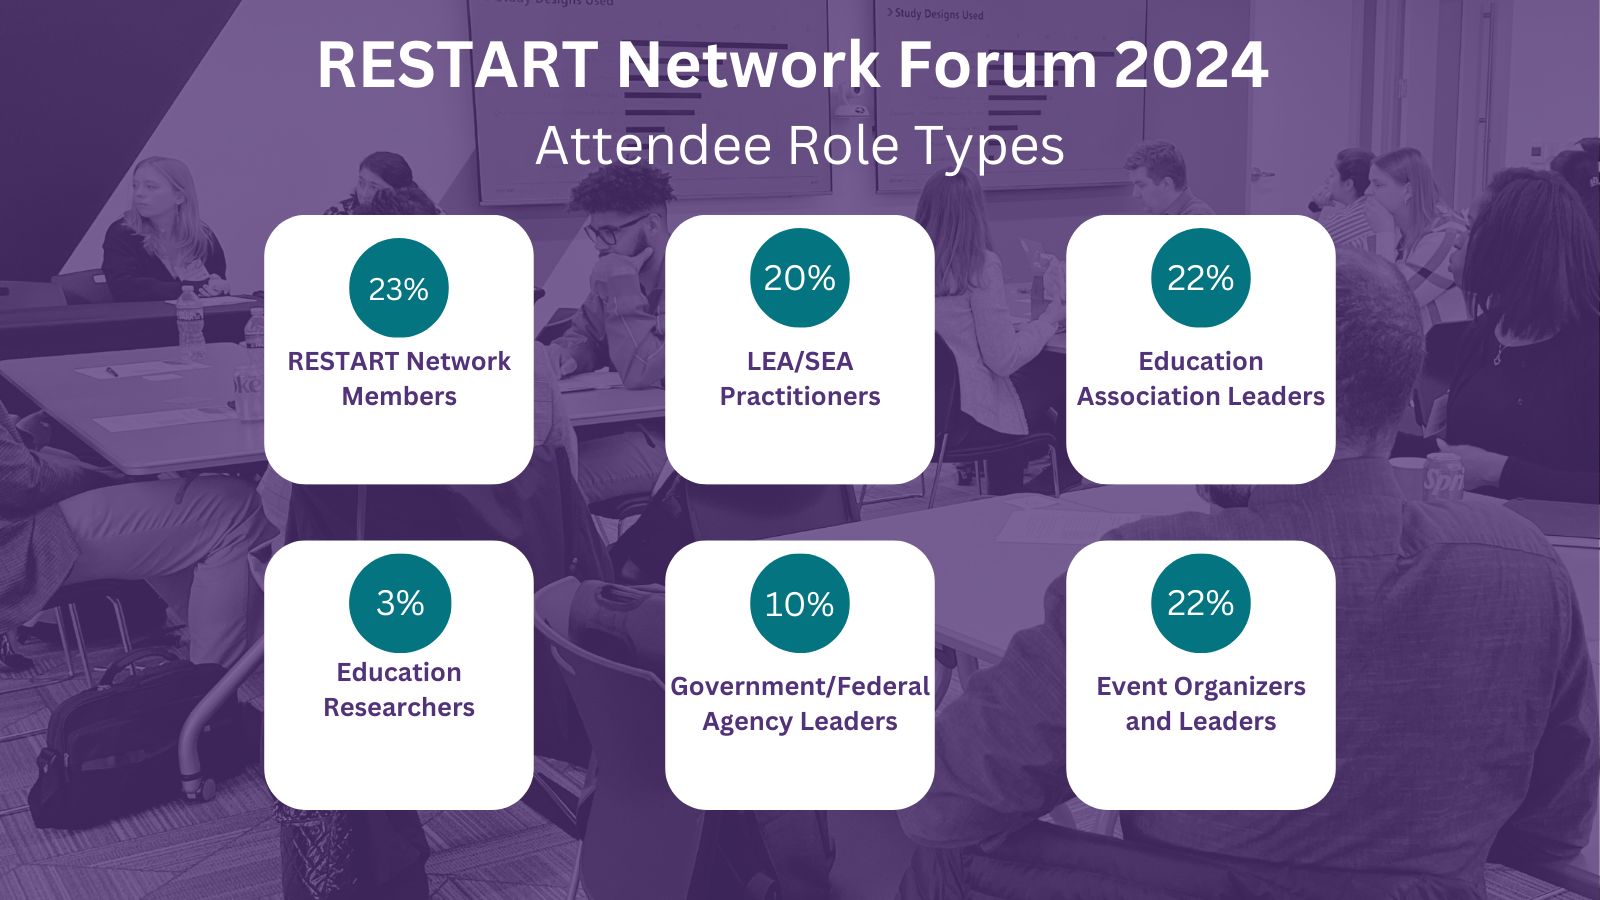 Graphic shows that 23 percent of attendees were network members, 20 percent were LEA/SEA practitioners, 22 percent were association leaders, 3 percent were researchers not affiliated with the network, 10 percent were government leaders, and 22 percent were event organizers 